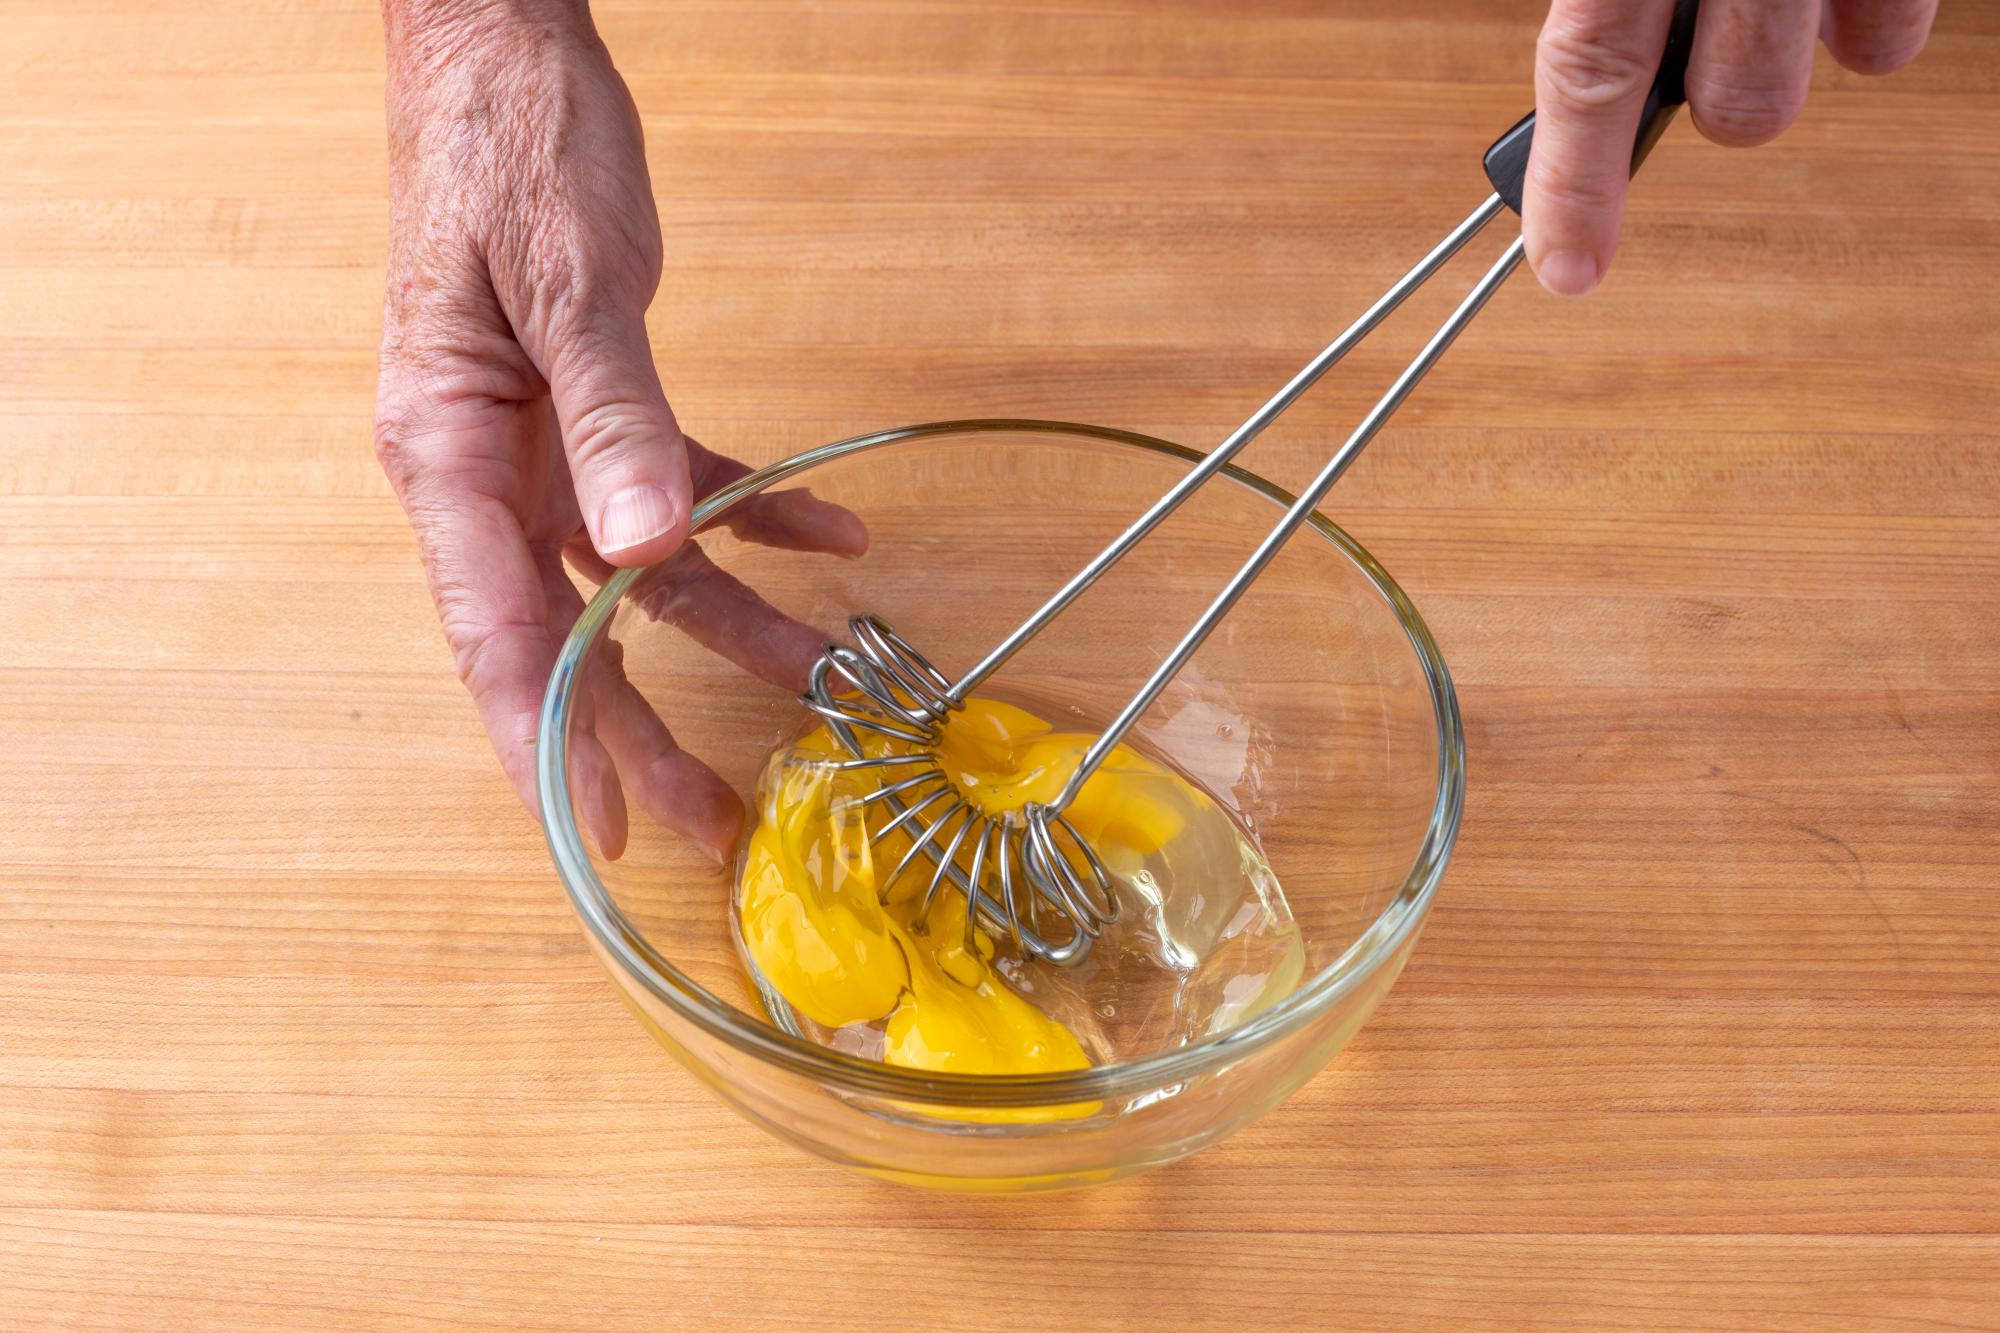 Beat the eggs with a Mix-Stir.